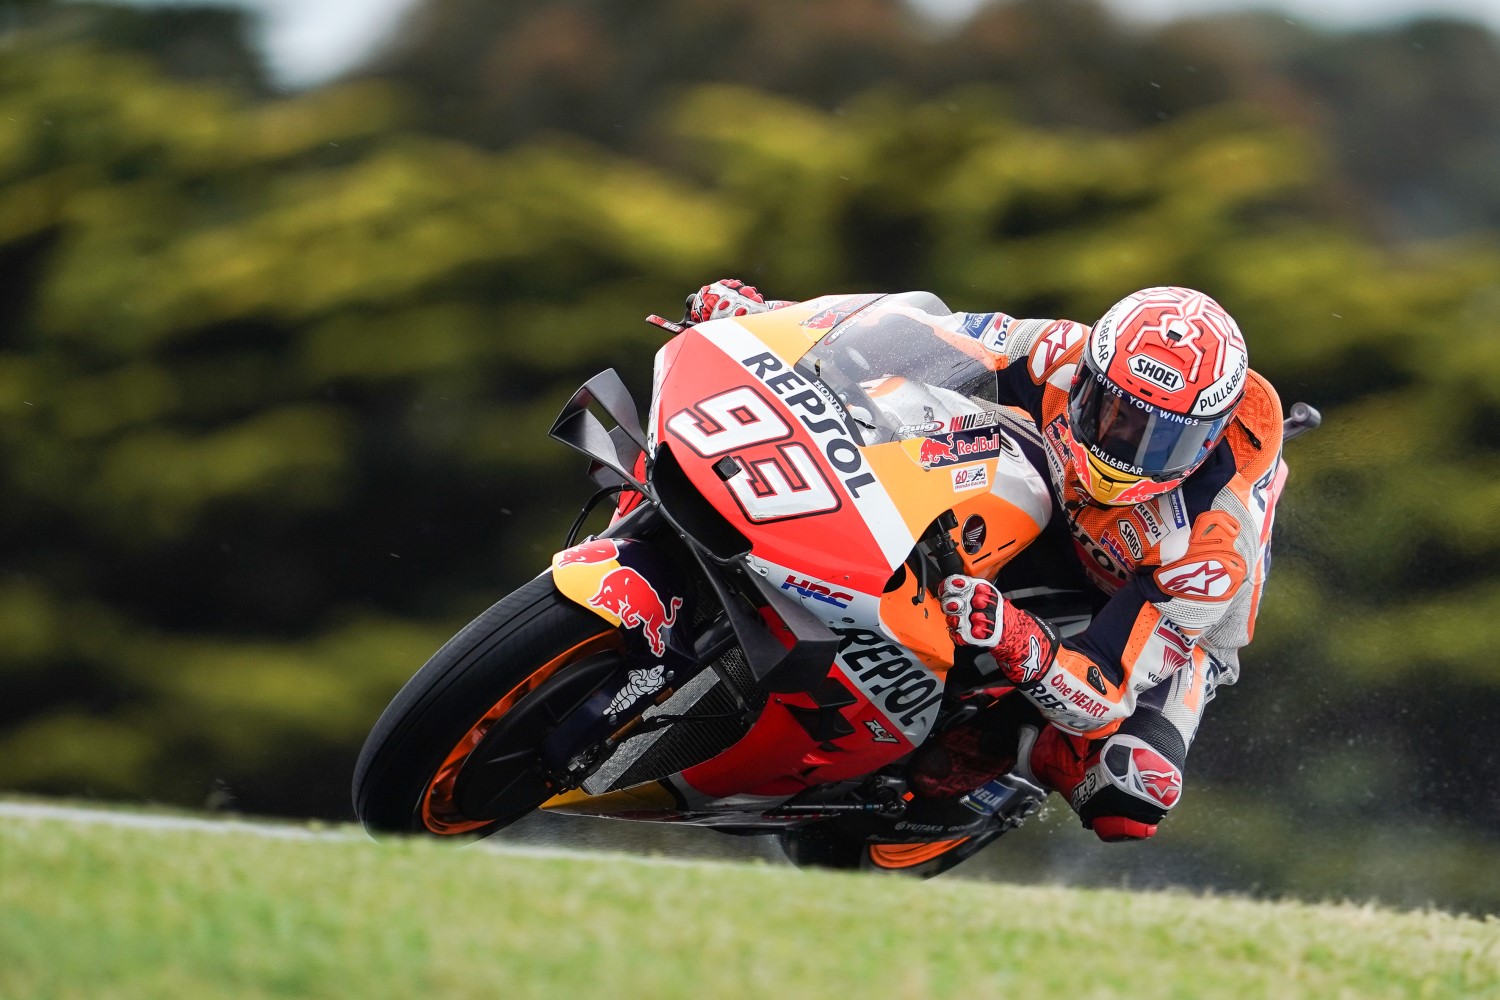 Marquez fastest in final practice